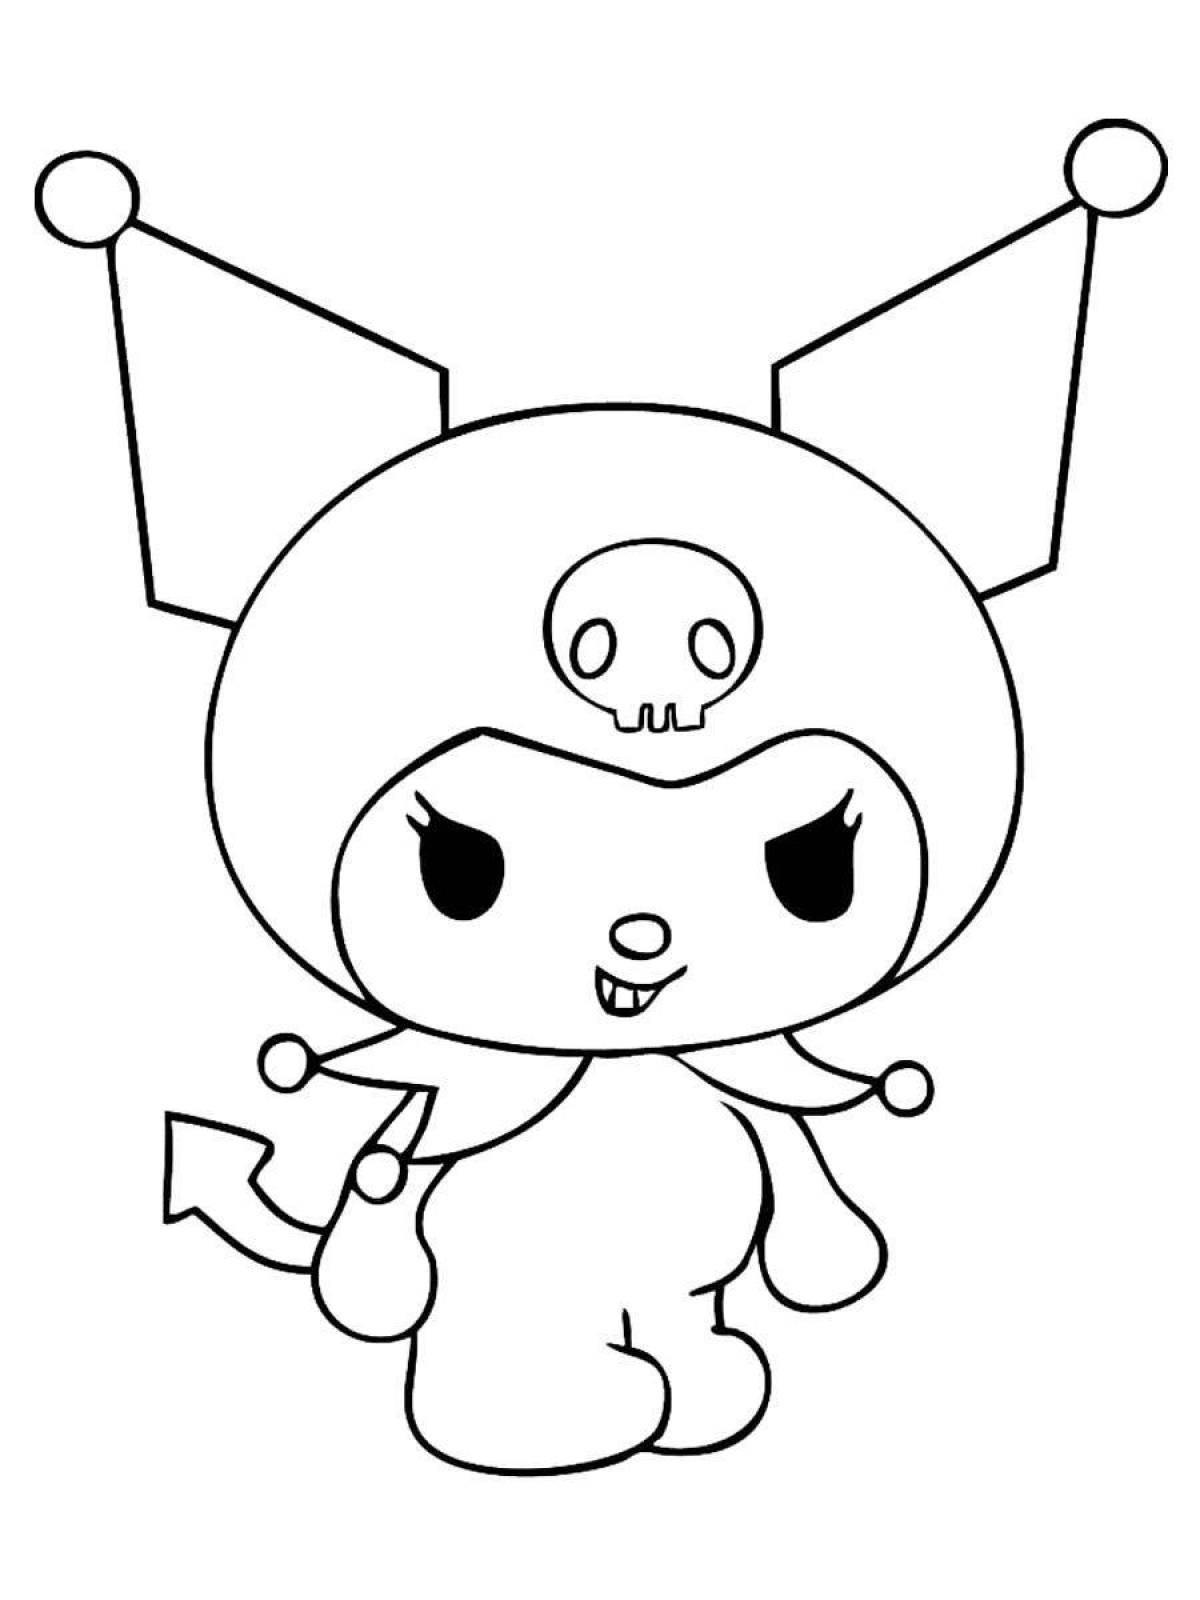 Little hello kitty kuromi coloring page